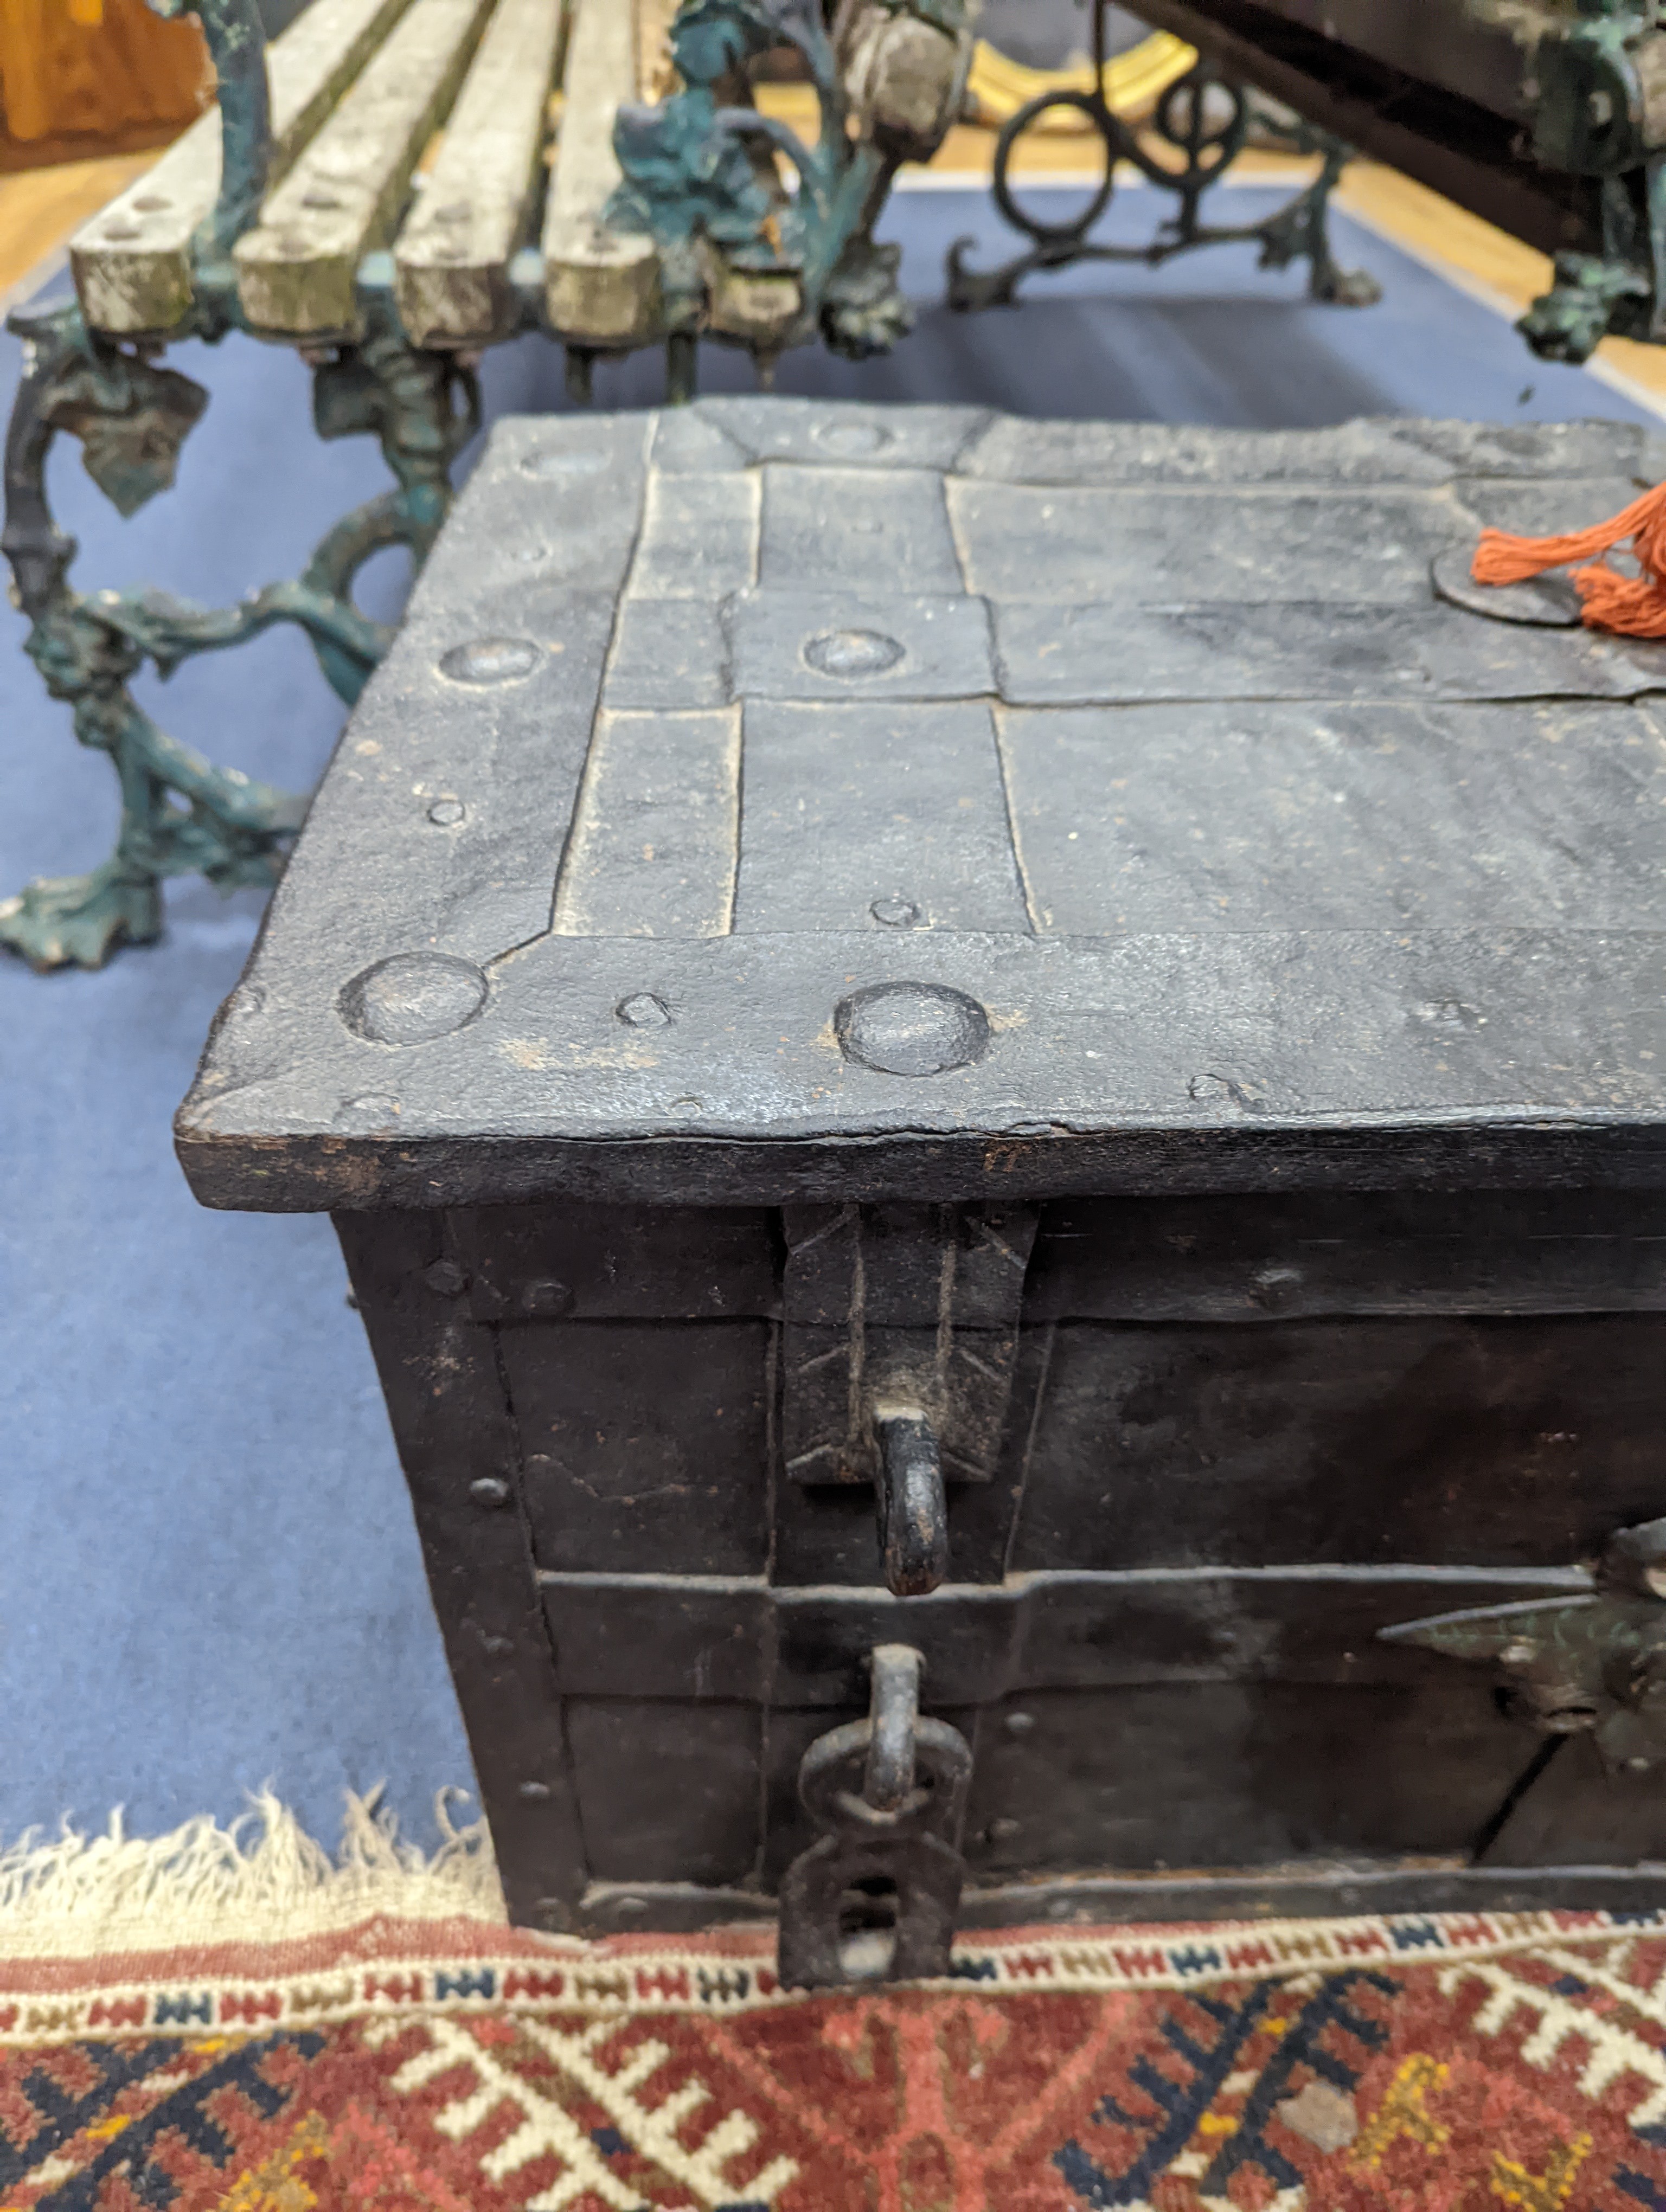 A 17th/18th century German ironbound 'Armada' chest, with key